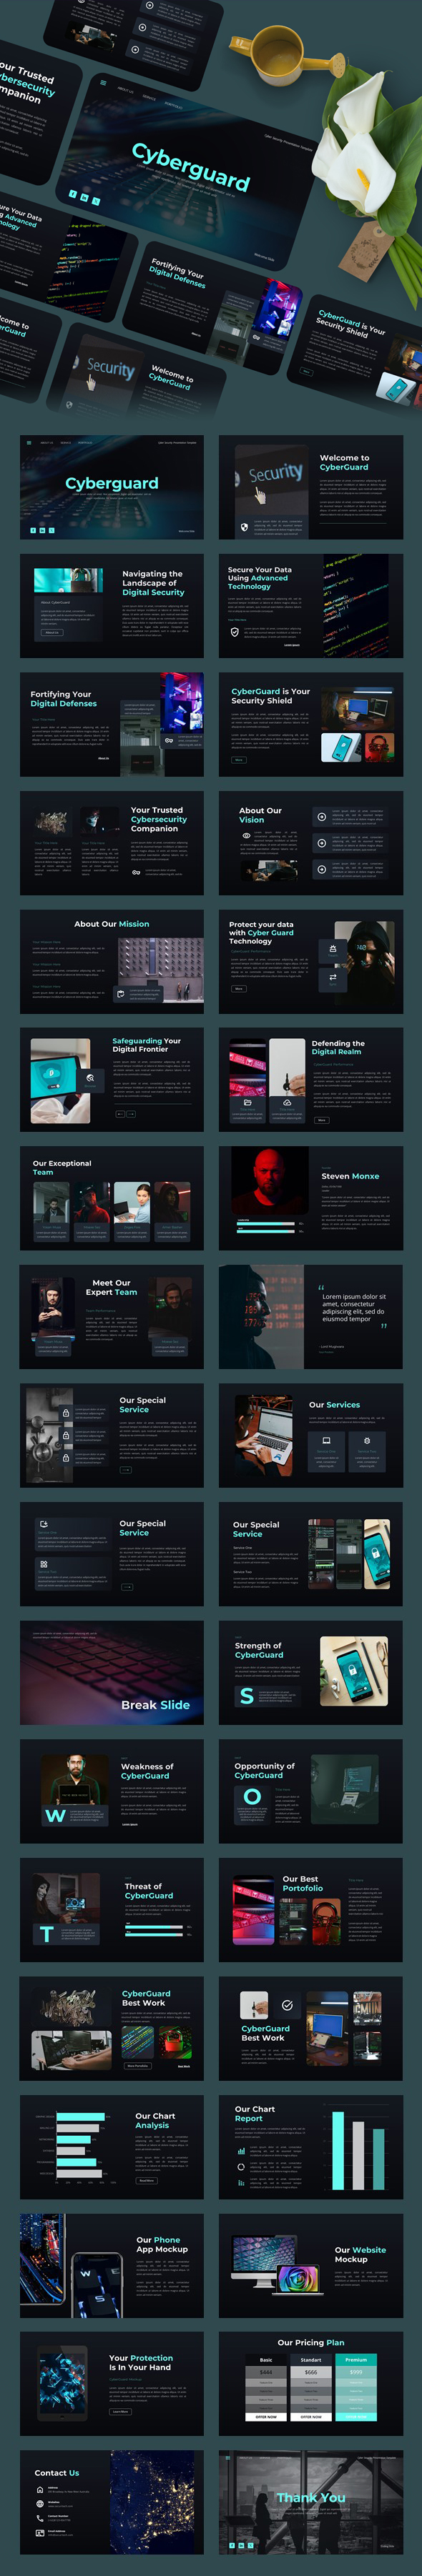 Cyberguard - Cyber Security Google Slides Template